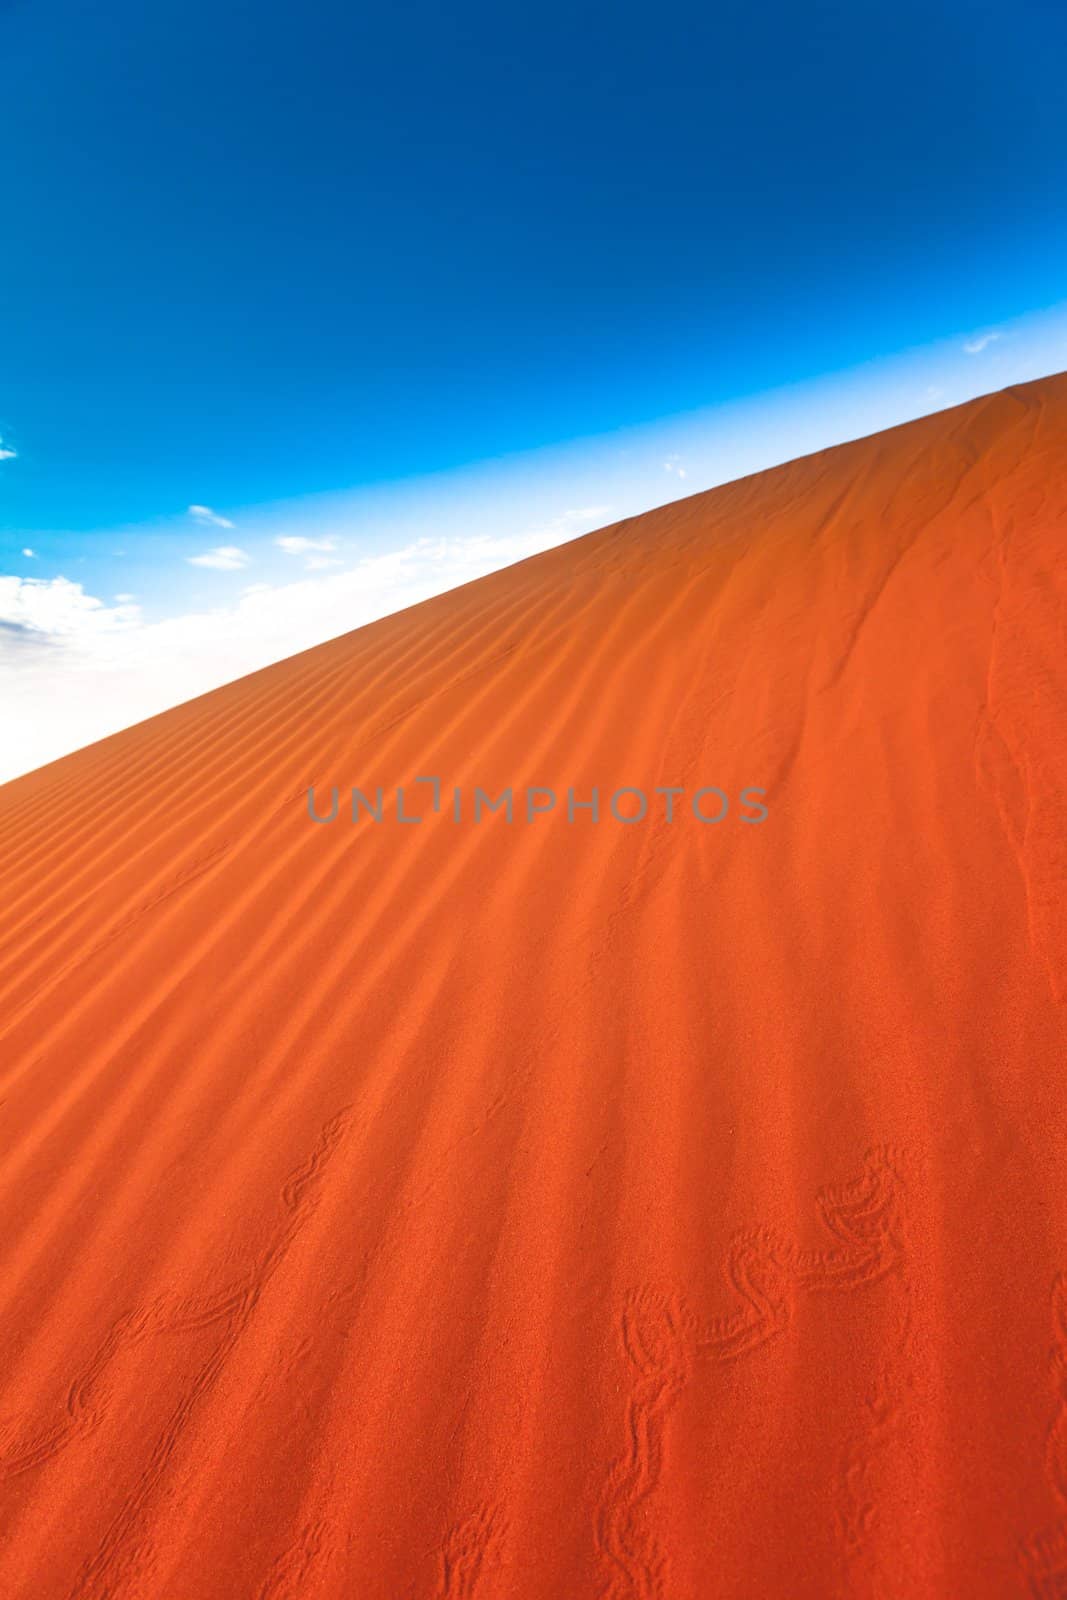 Animal tracks in red sand dune by hangingpixels